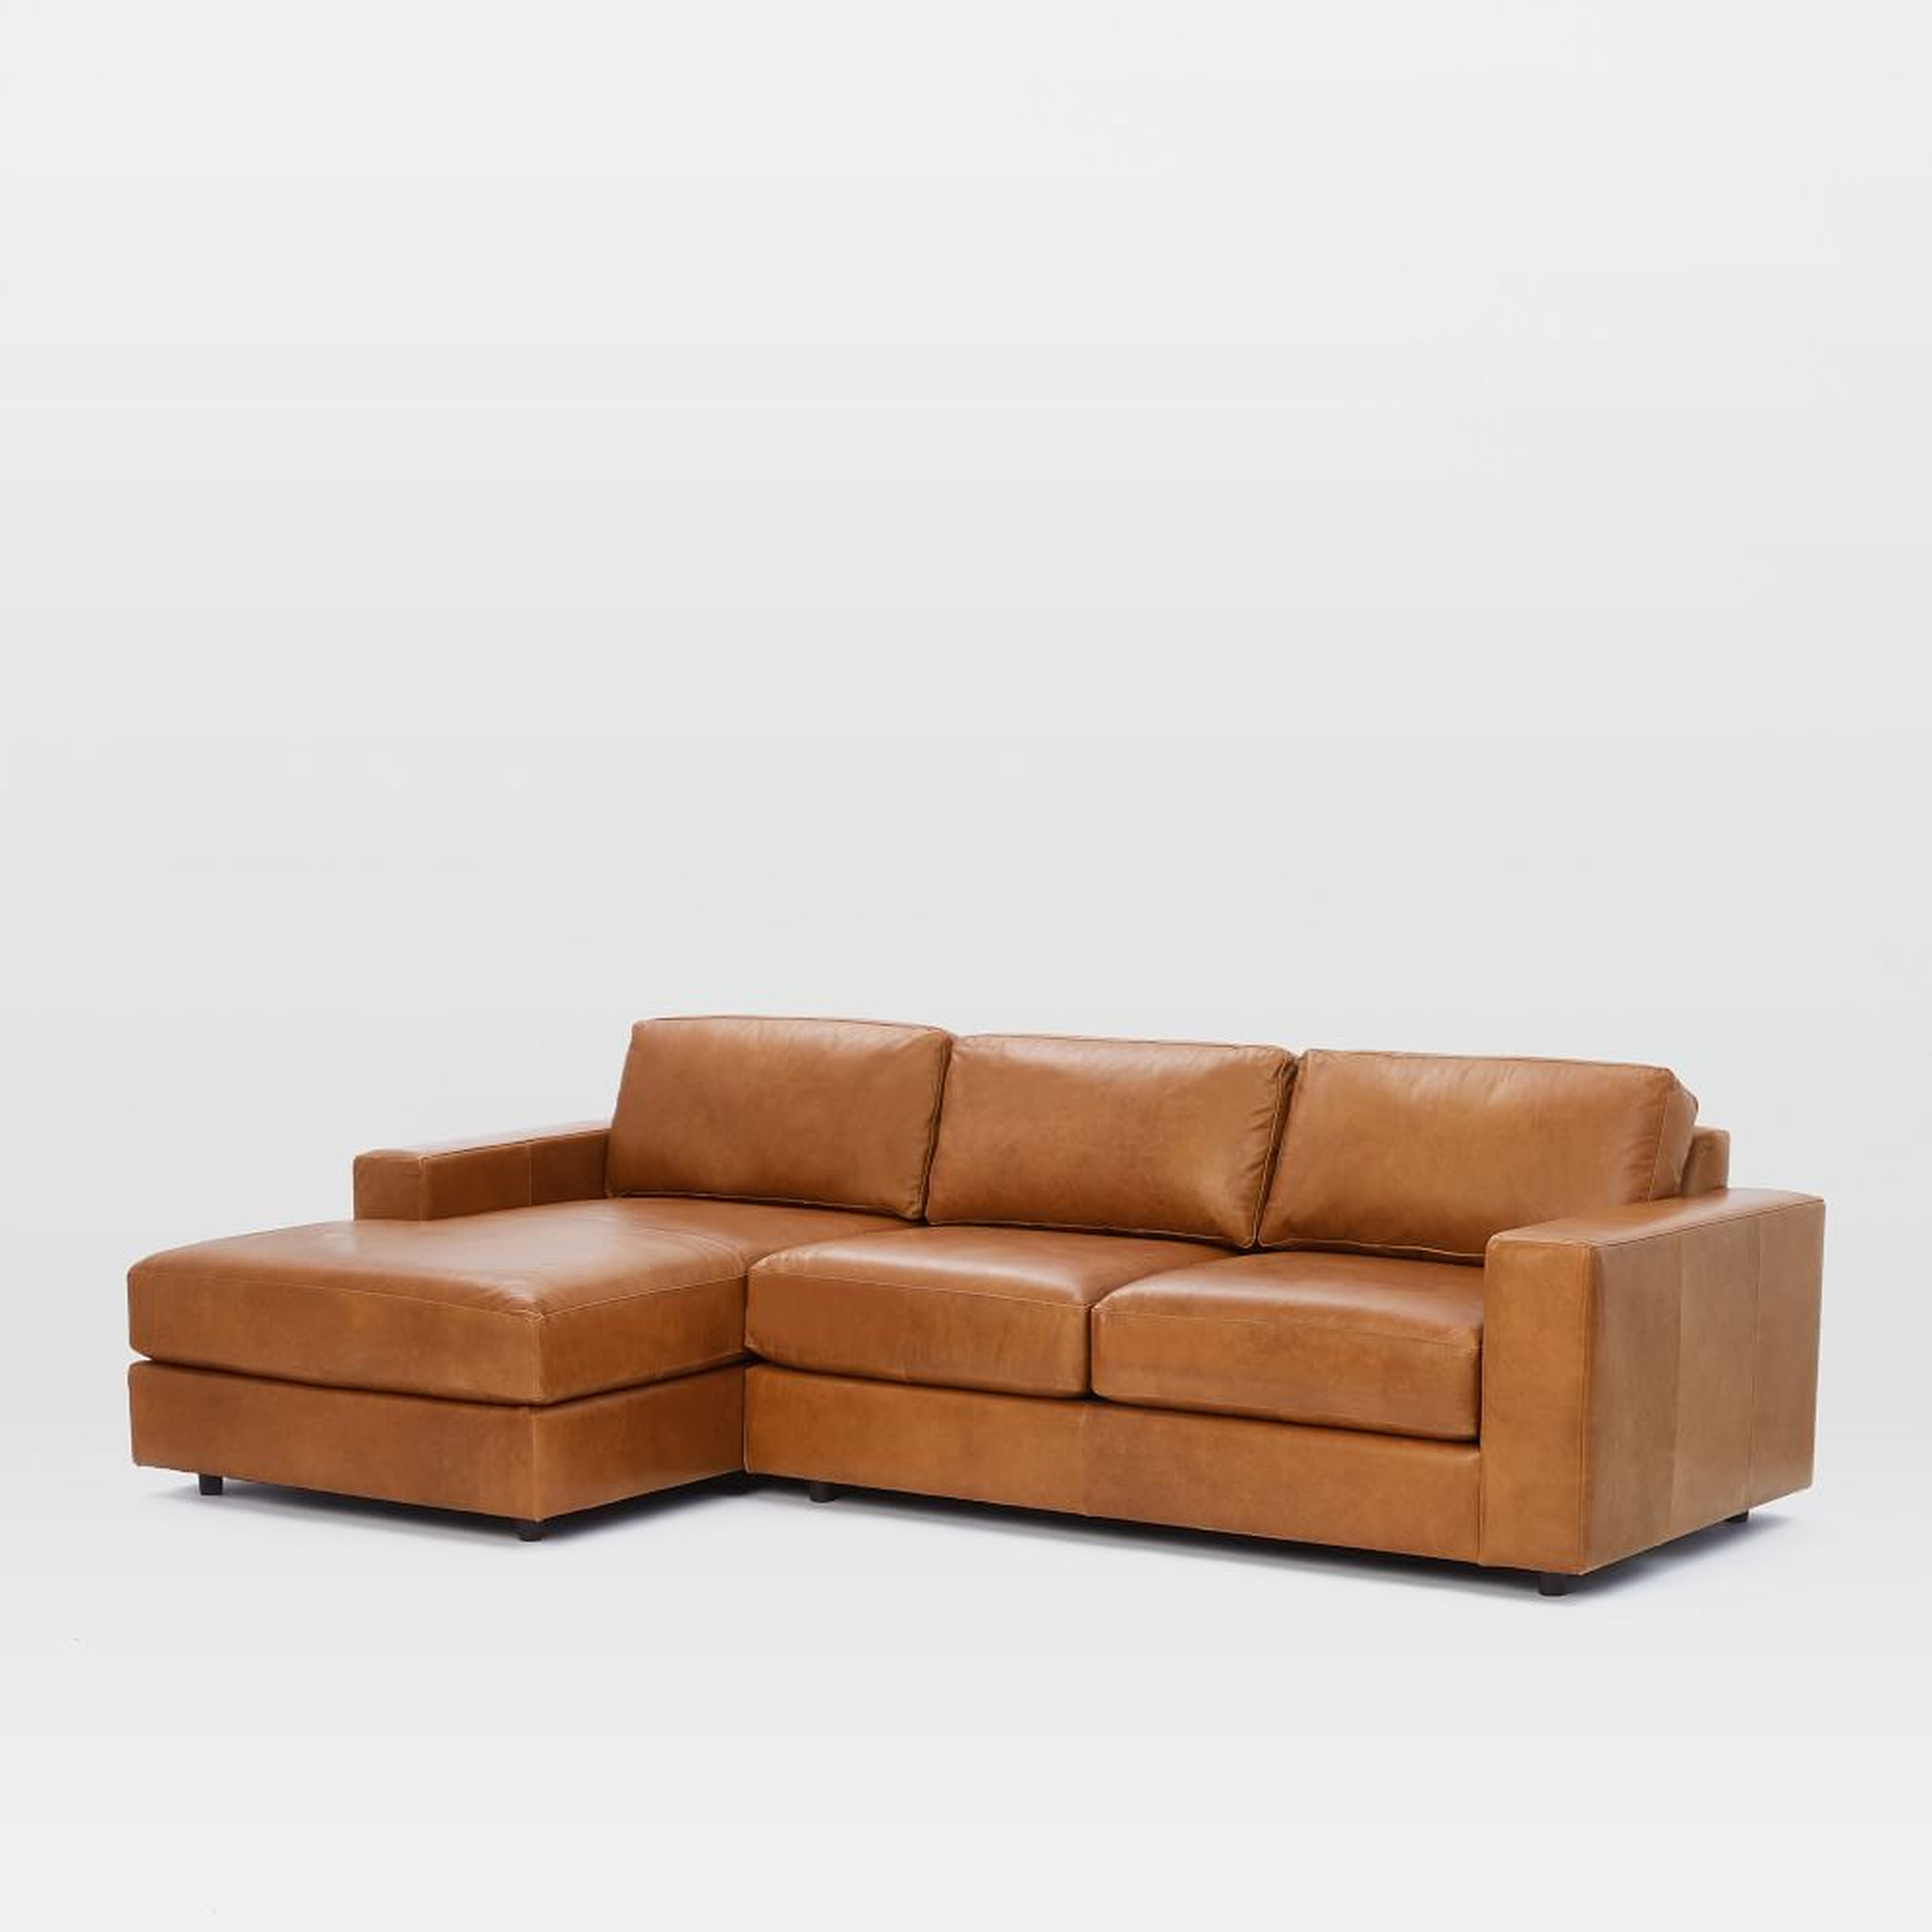 Urban Sectional Set 02: Right Arm 2 Seater Sofa, Left Arm Chaise, Poly, Saddle Leather, Nut - West Elm